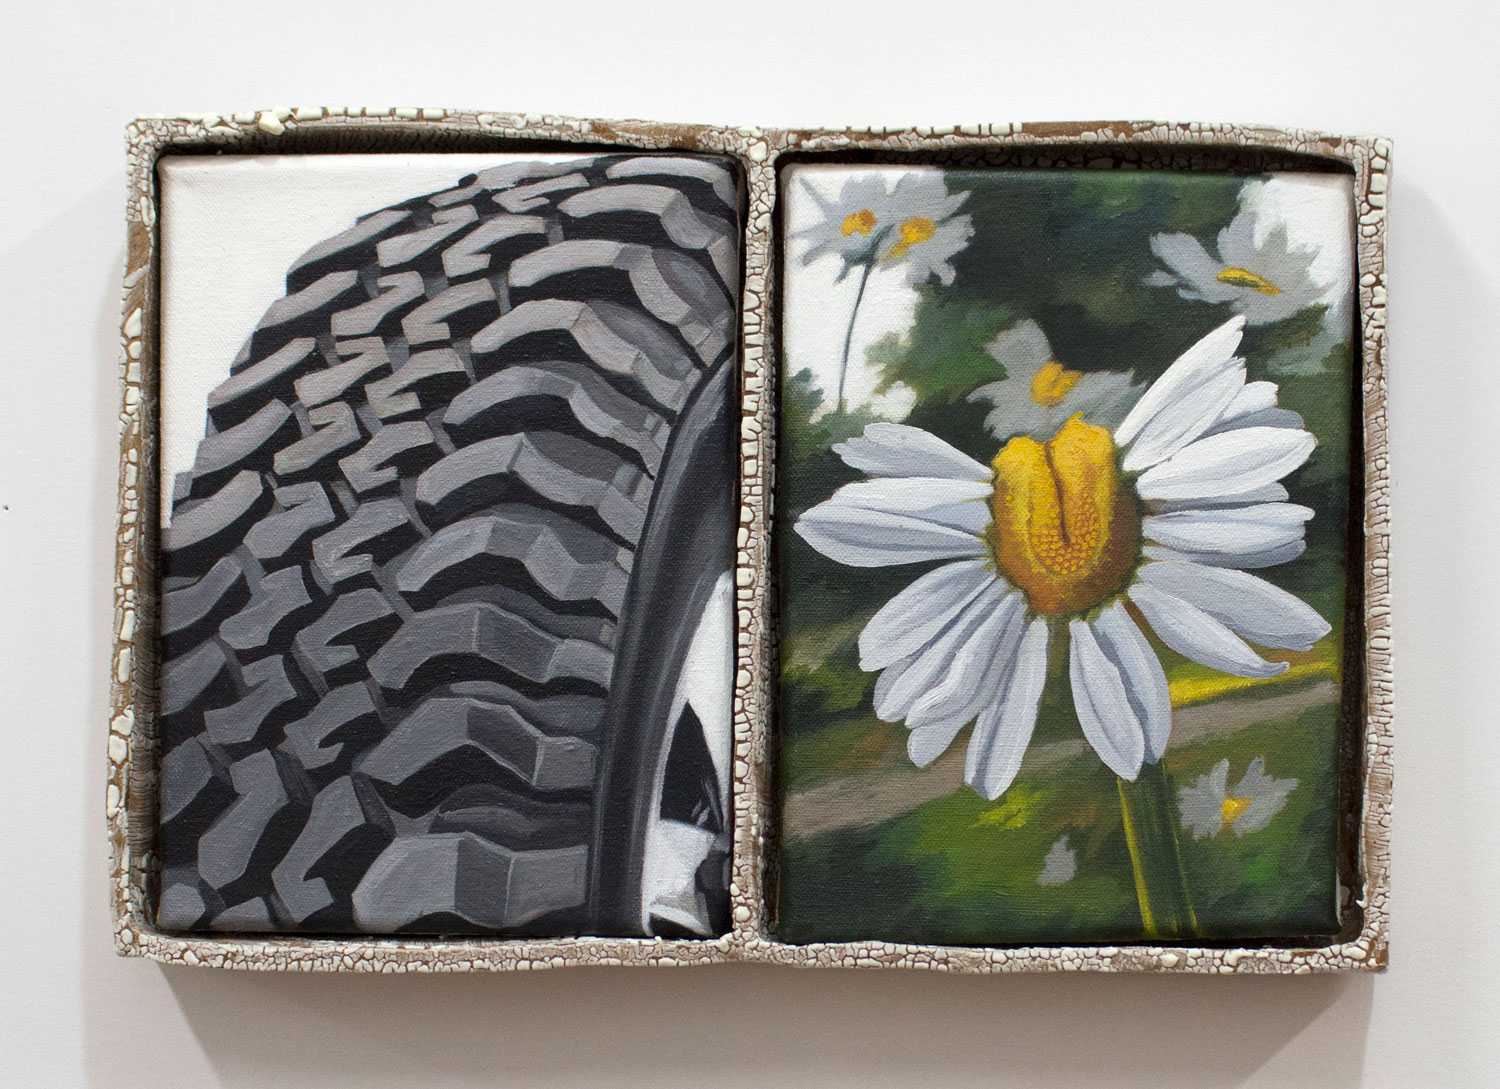 Stephanie Temma Hier's Re-group and Re-grout (Fukushima Daisy III), 2019 mounted on white wall